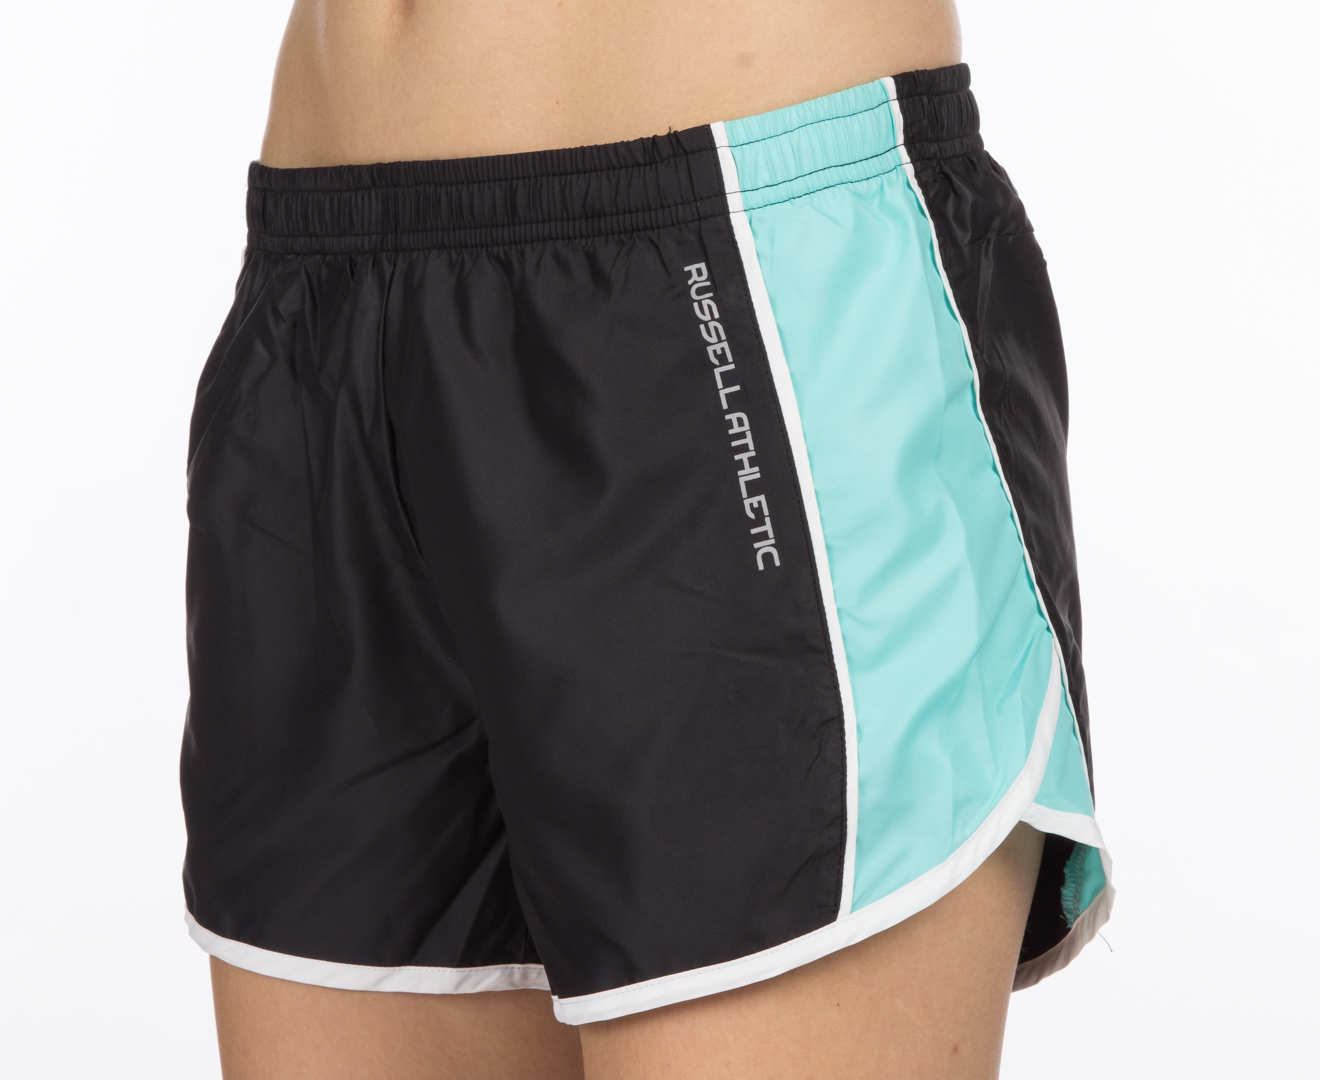 Russell Athletic Women's Running Shorts - Black/Lucite | Catch.com.au